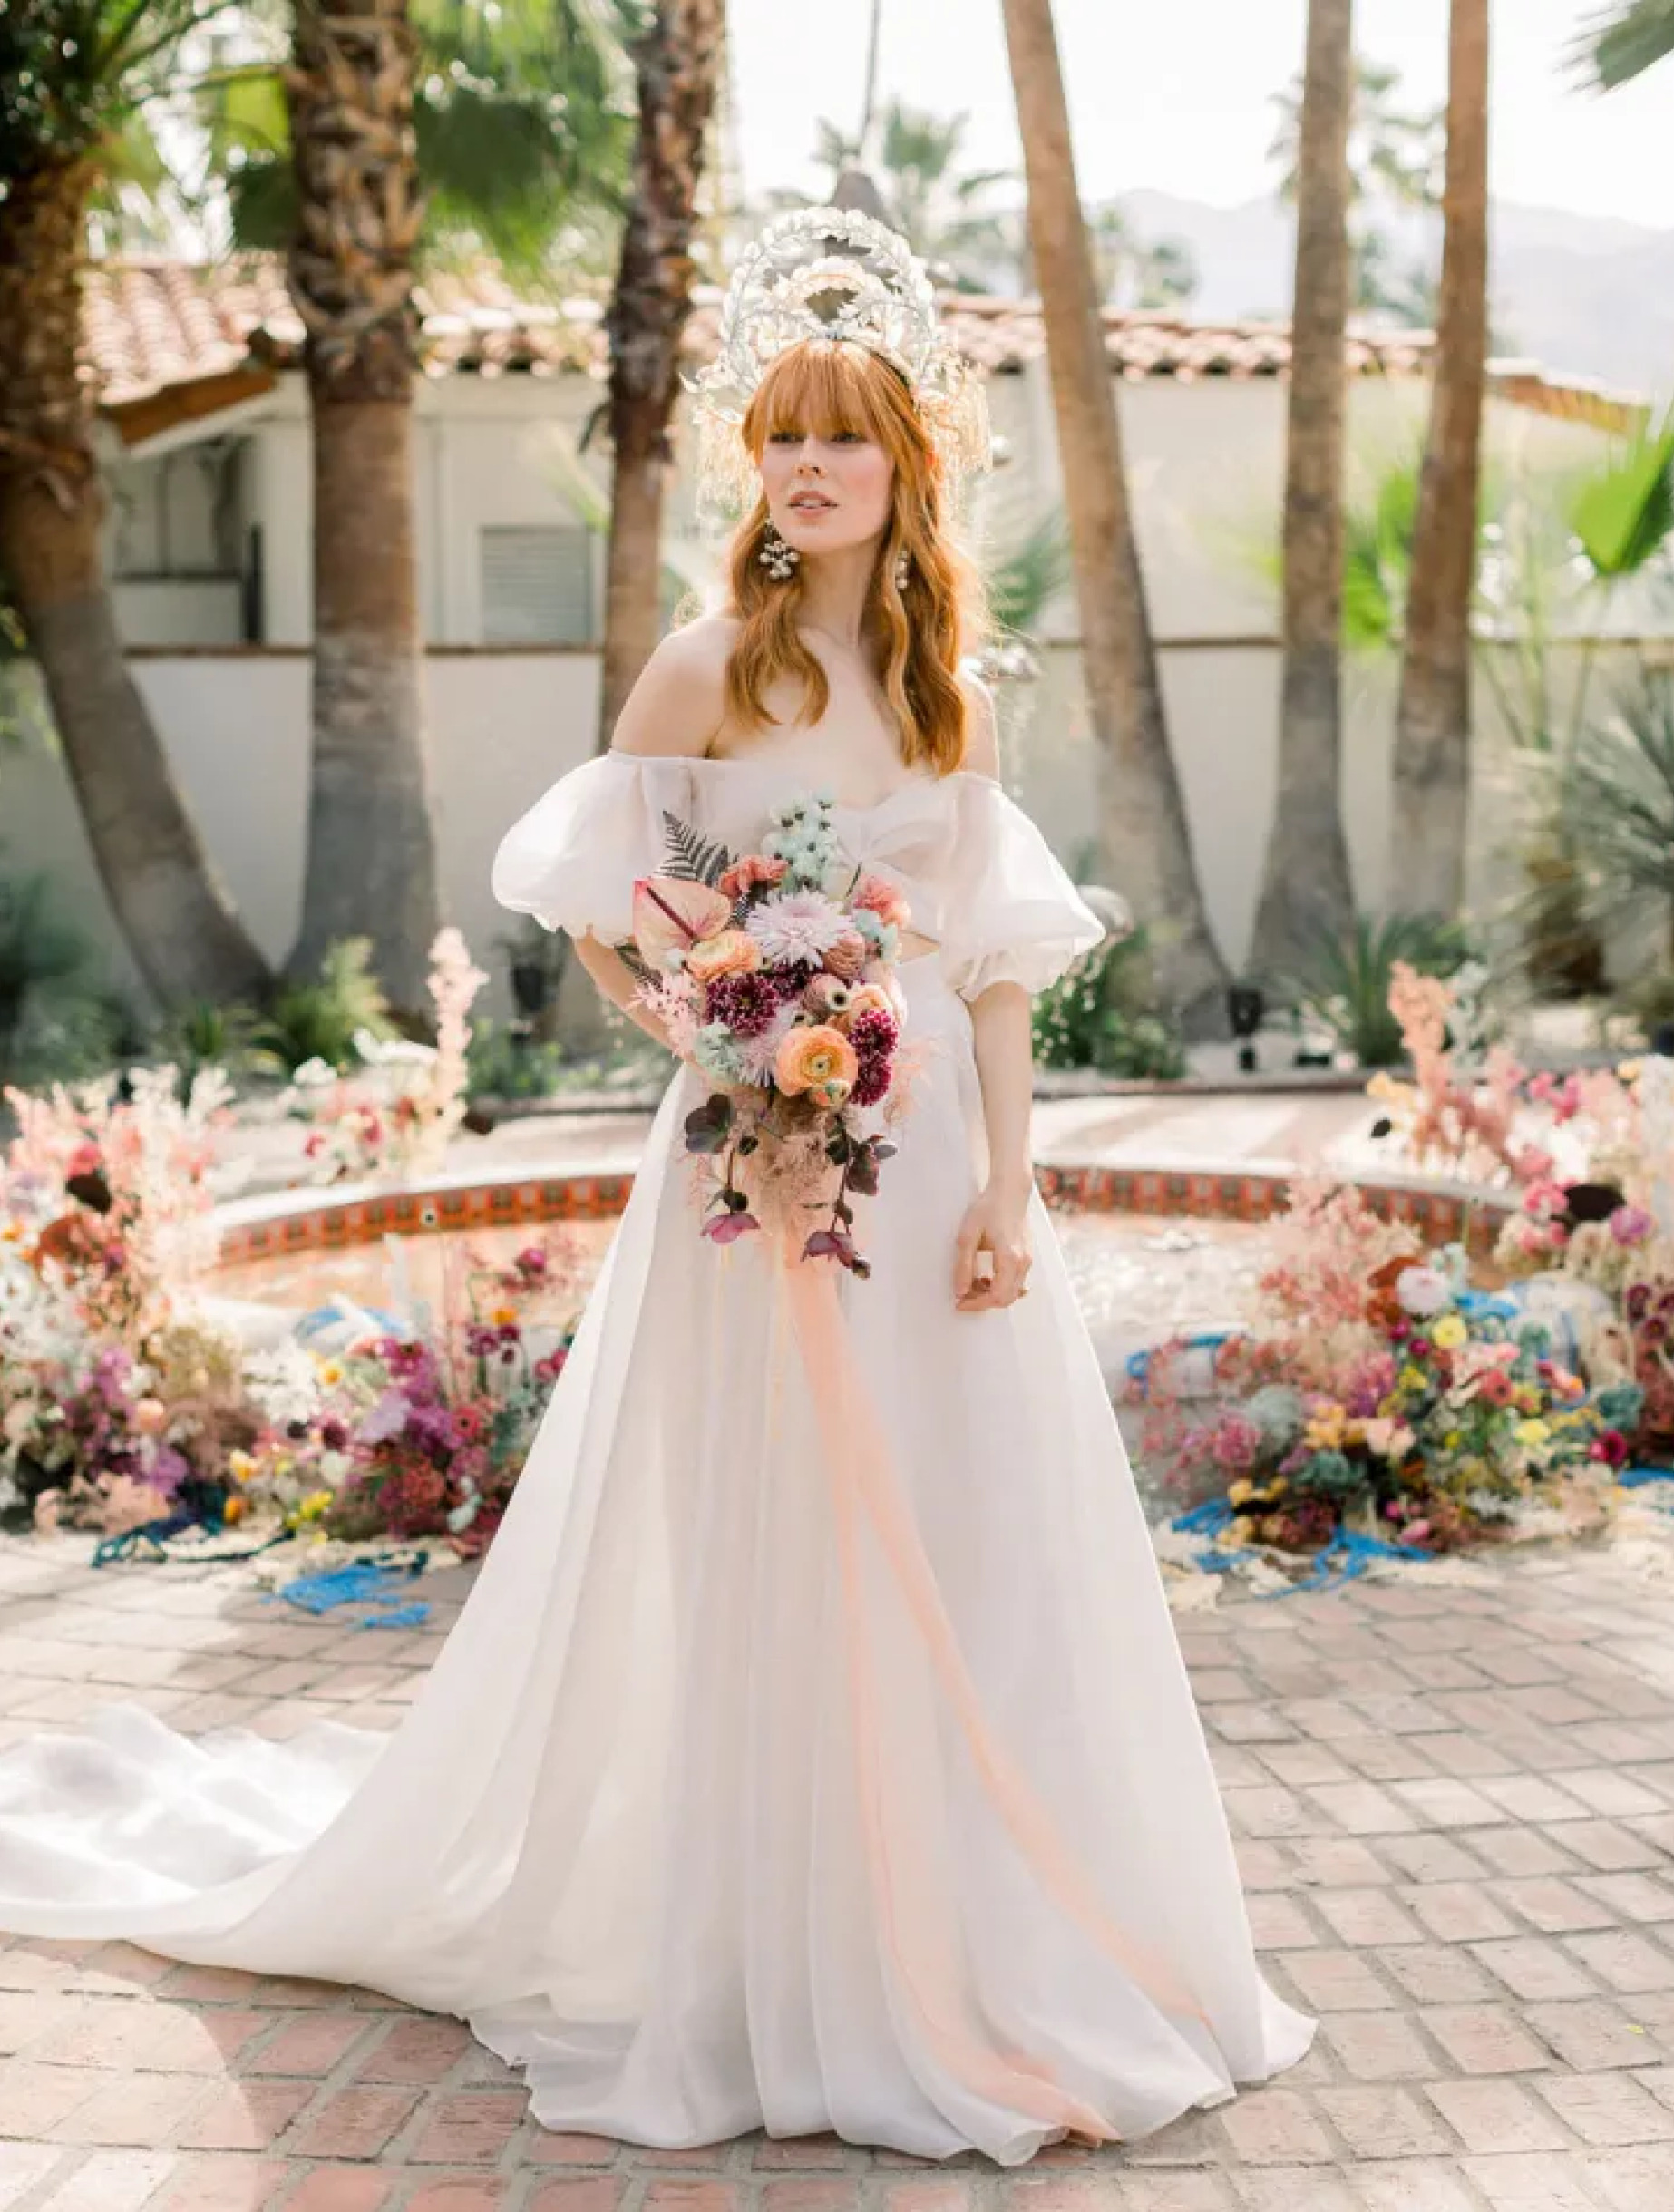 https://greenweddingshoes.com/bohemian-whimsy-for-this-micro-wedding-inspiration-palm-springs/